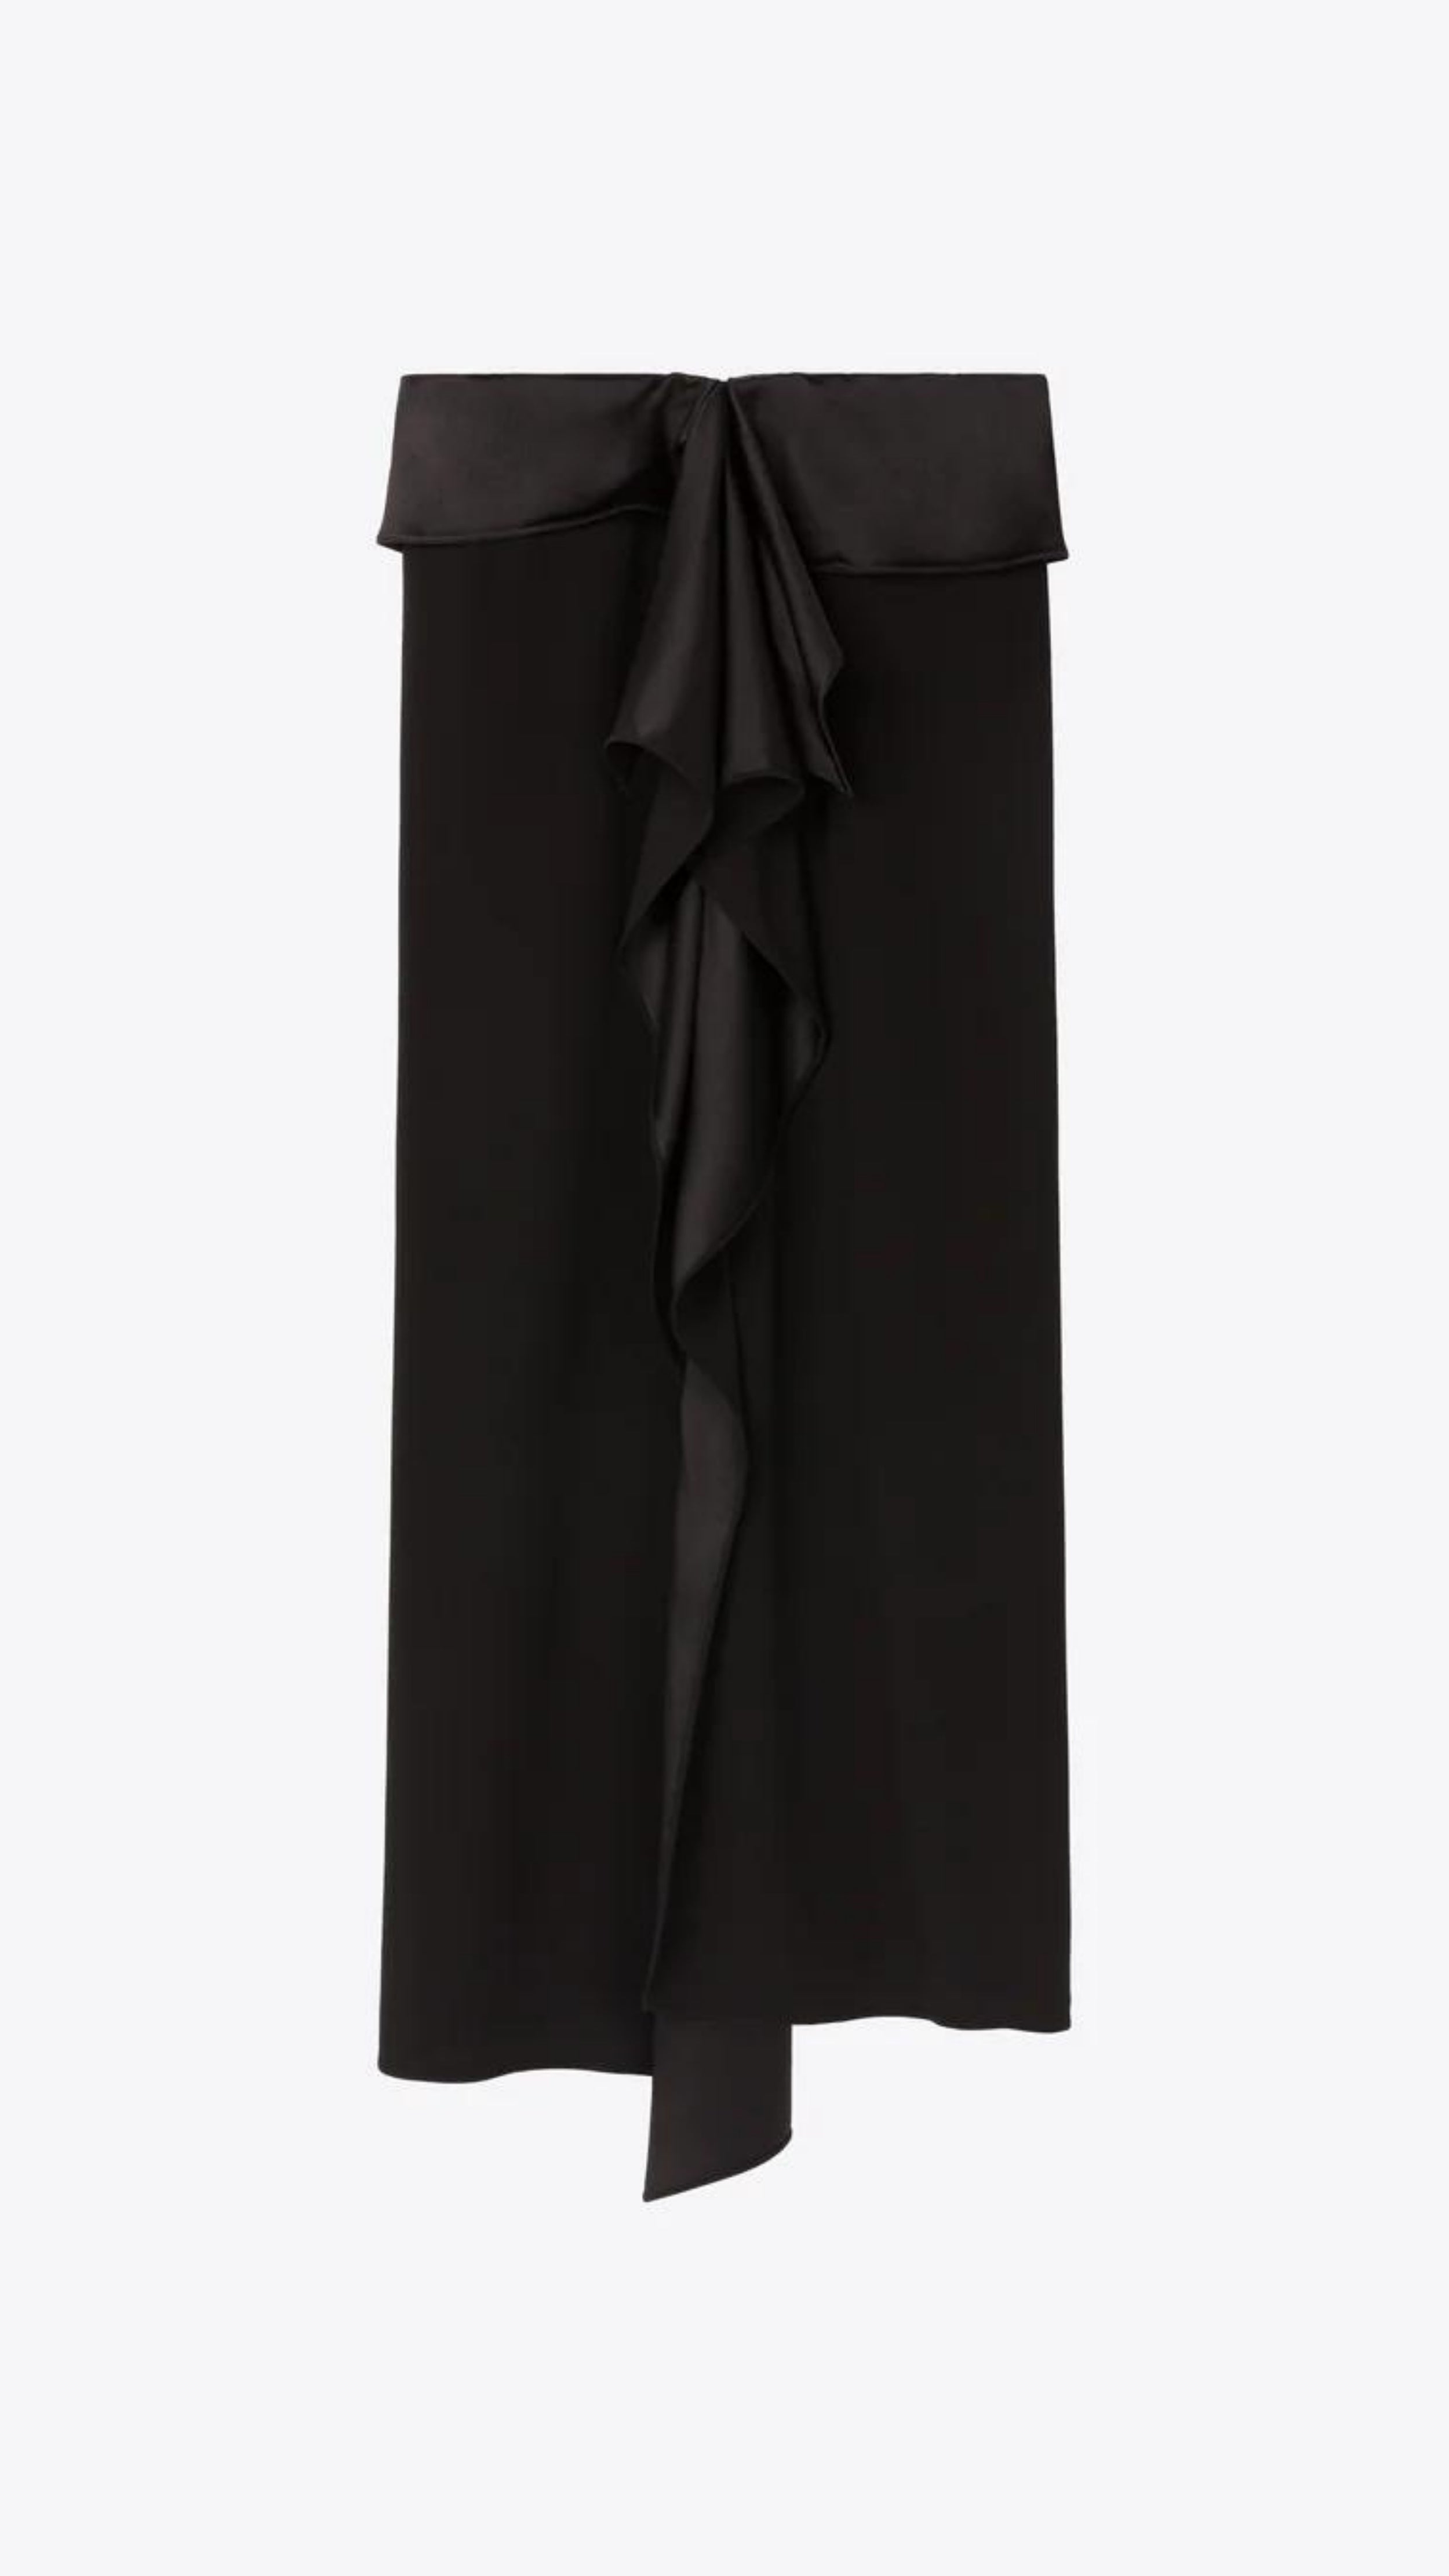 AZ Factory Colville Molly Molloy Lucinda Chambers, Ruffled Crepe Skirt in Black A sleek midi length skirt crafted from a mix of crepe and satin, complemented by a fold-over belt and delicate ruffling along the front panel. Flat product photo